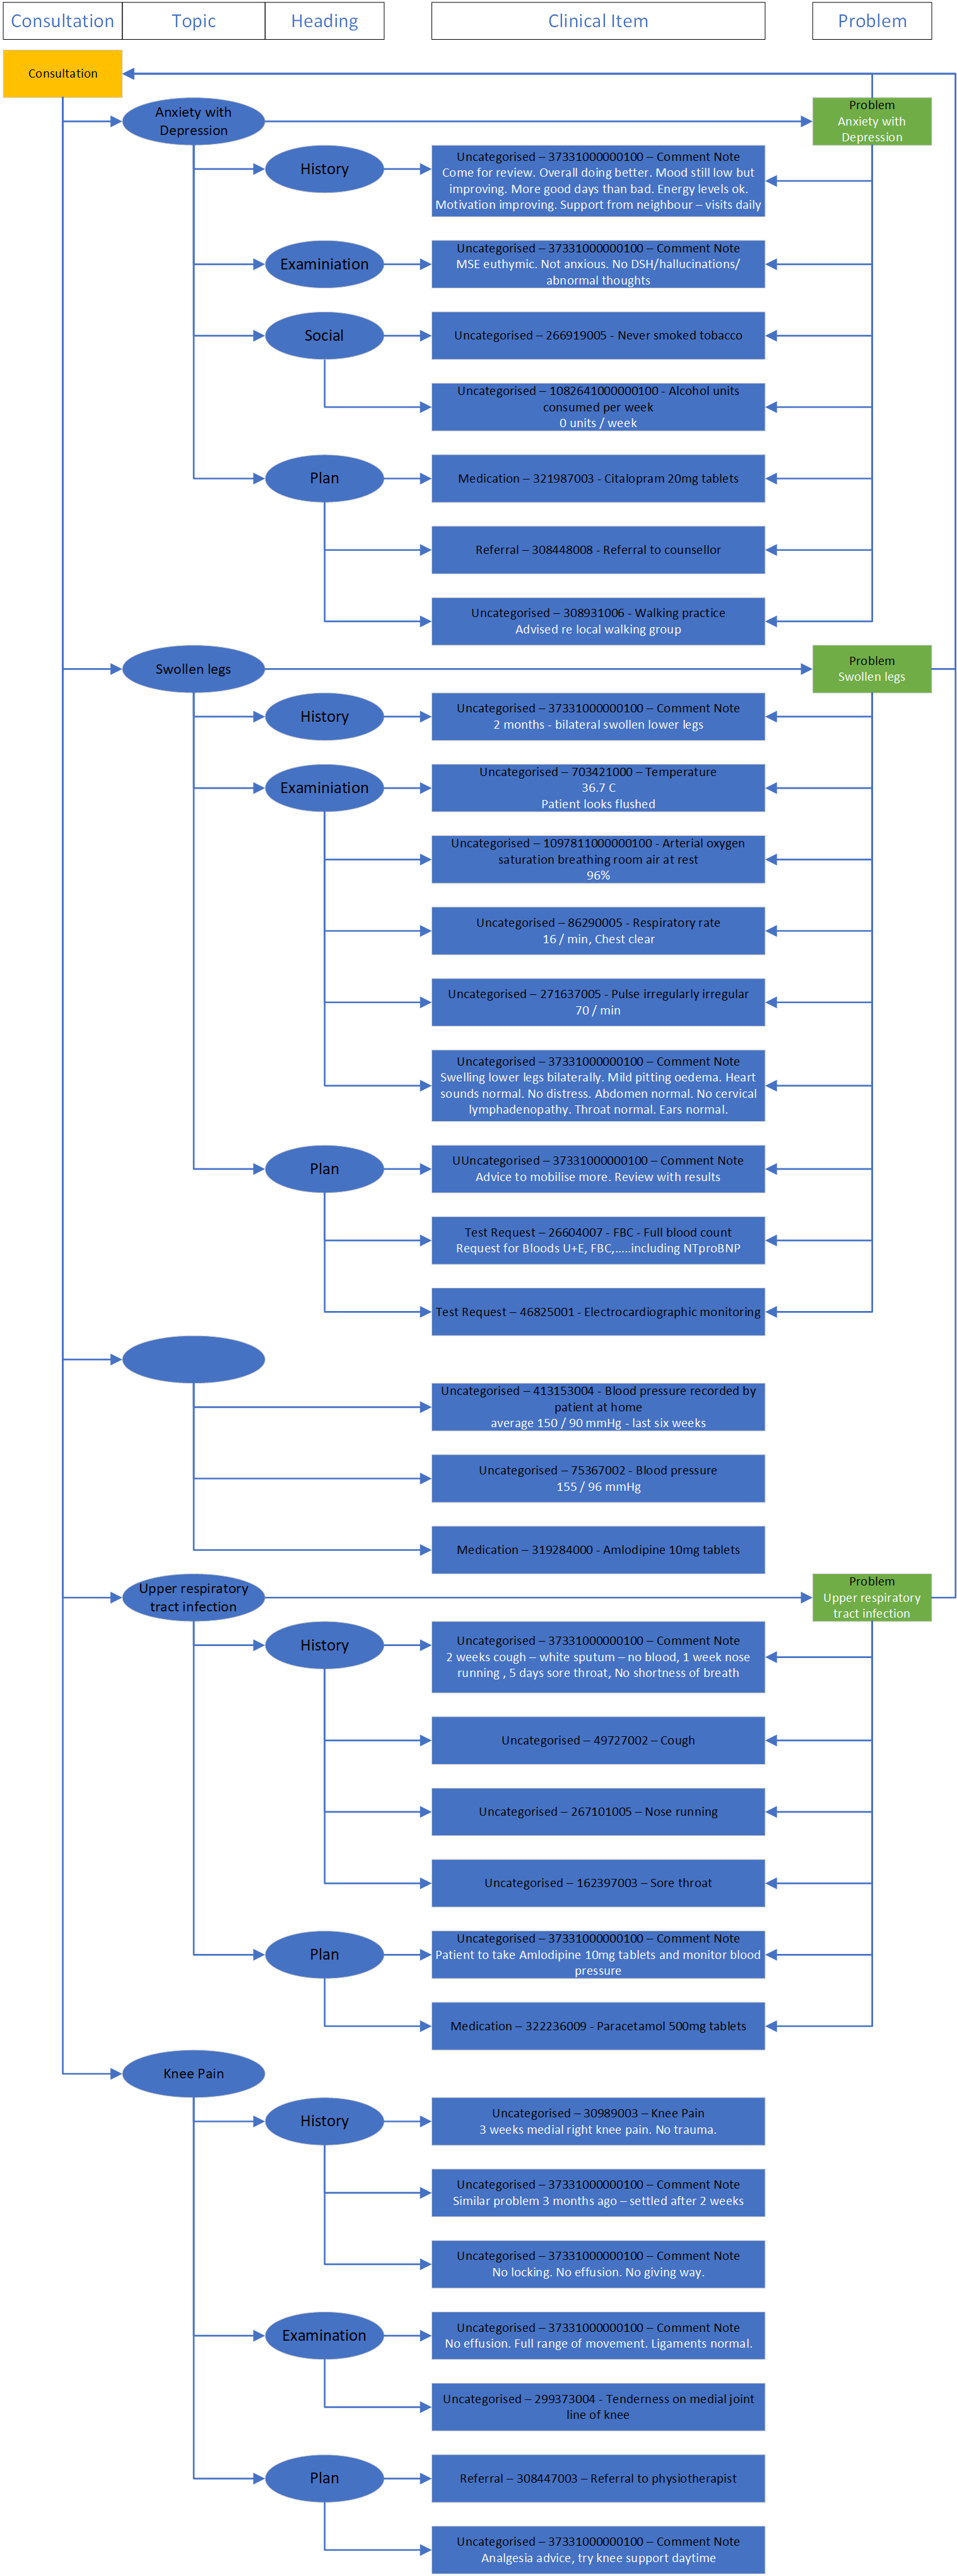 Sequence diagram for retrieving a patient record